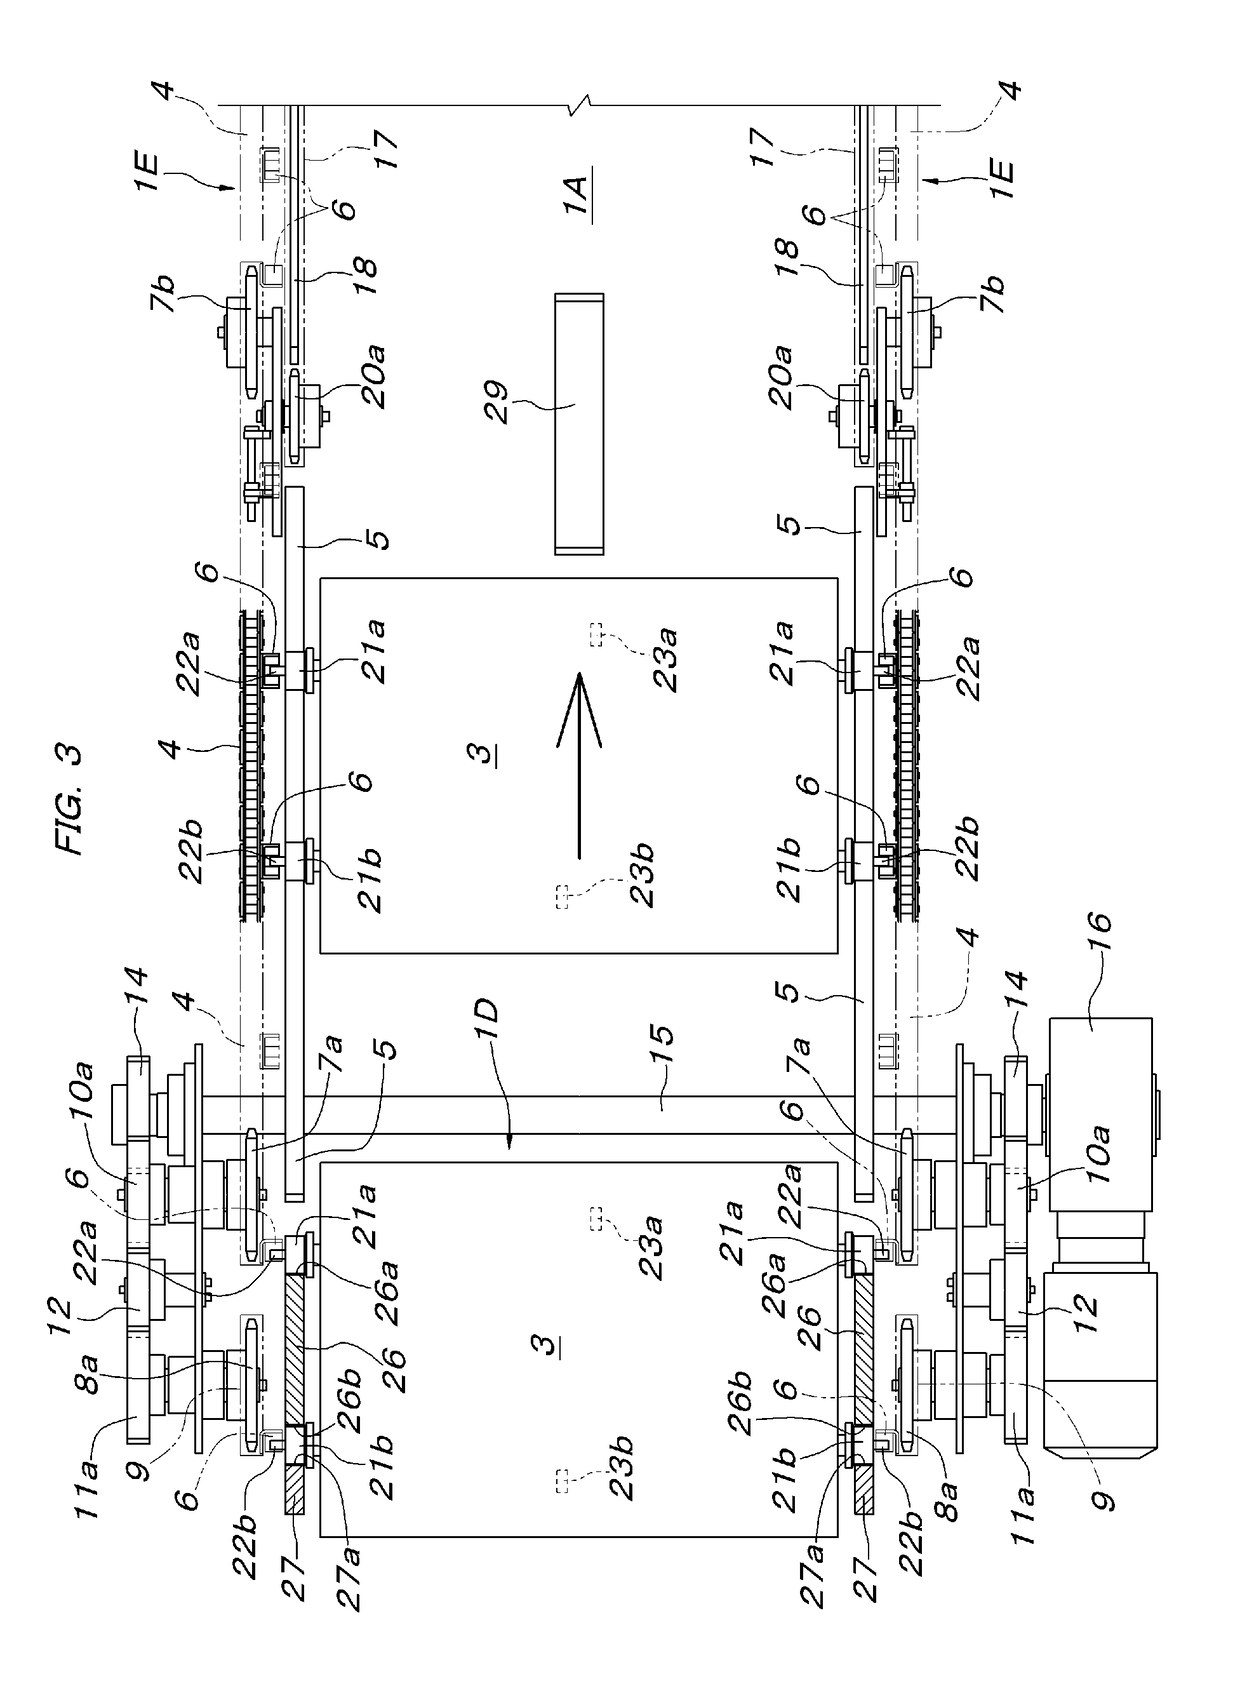 Conveyance Device Using Carriage